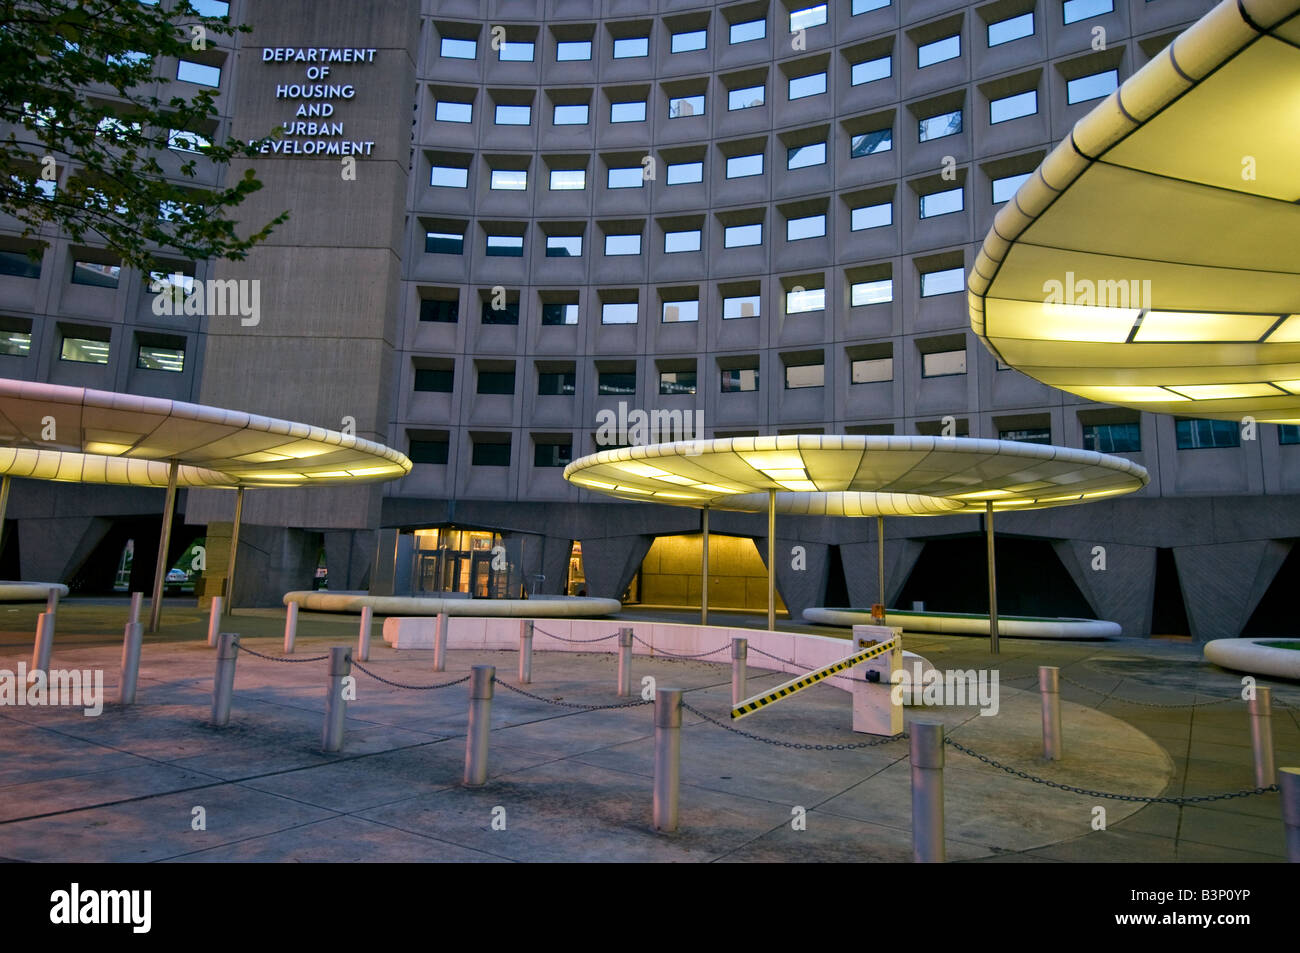 The exterior of the Department of Housing and Urban Development Building in Washington DC Stock Photo